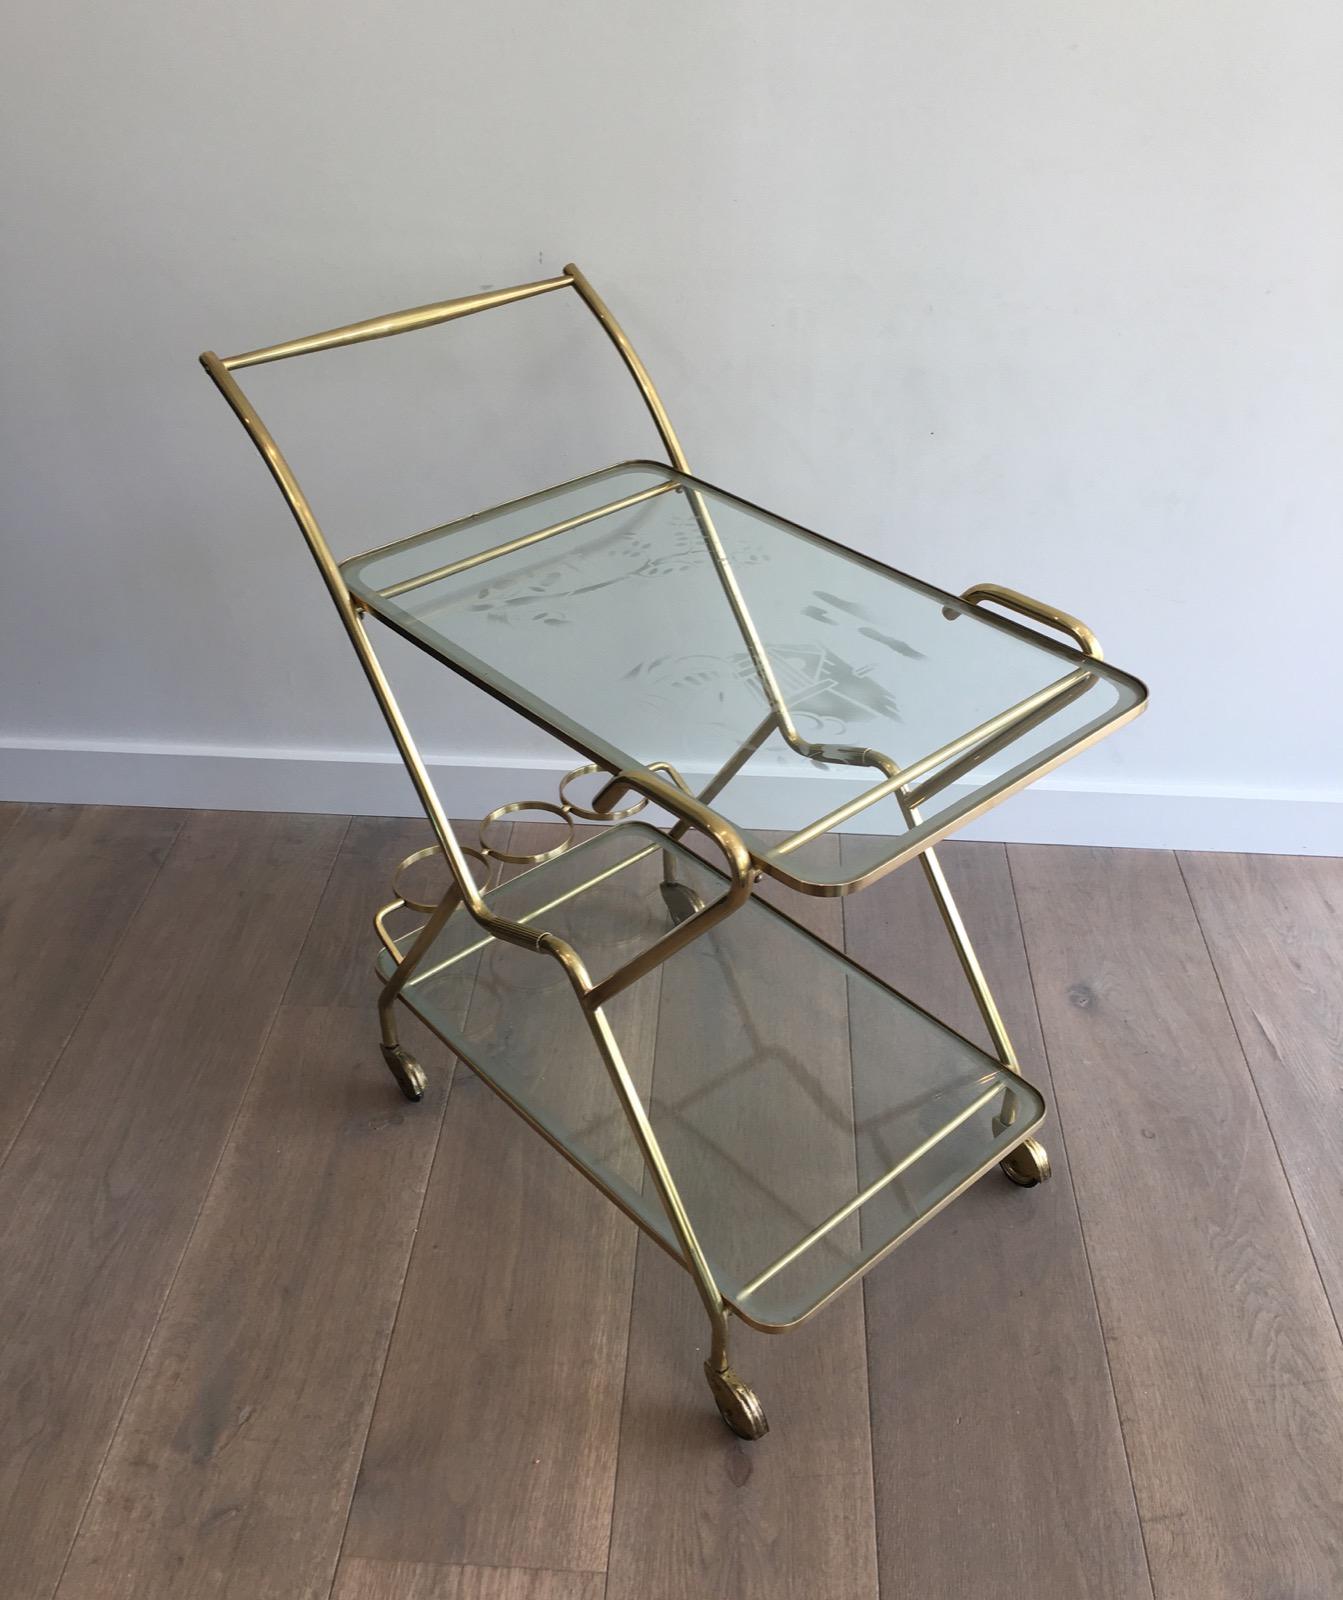 This drinks trolley is made of brass and engraved glass. The design is very simple and interesting. This is an Italian work, in the style of Cesare Lacca, circa 1950.